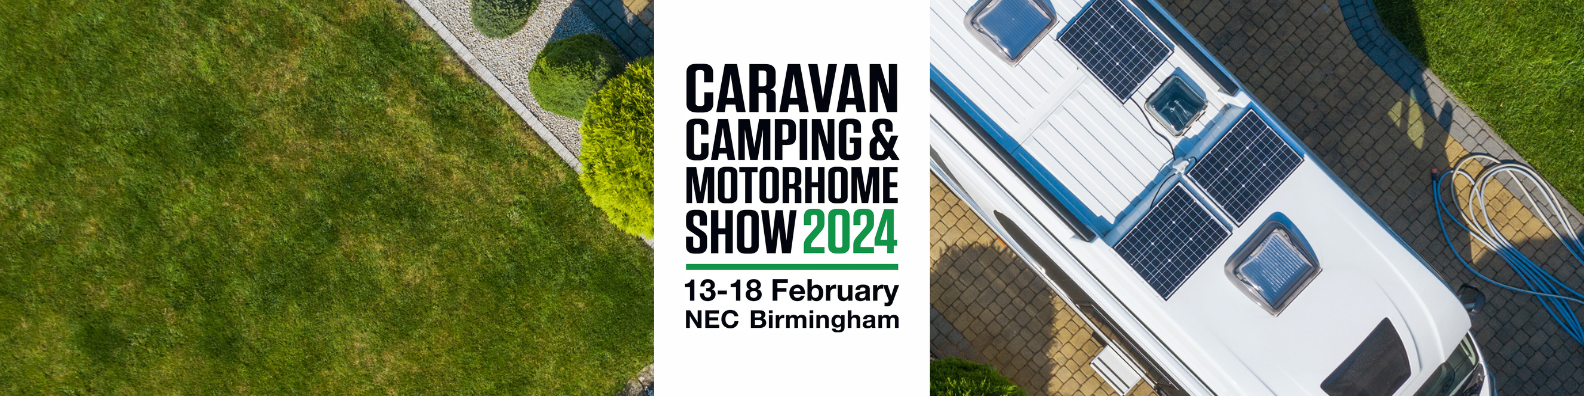 Gear Up for Adventure at the NEC this February!